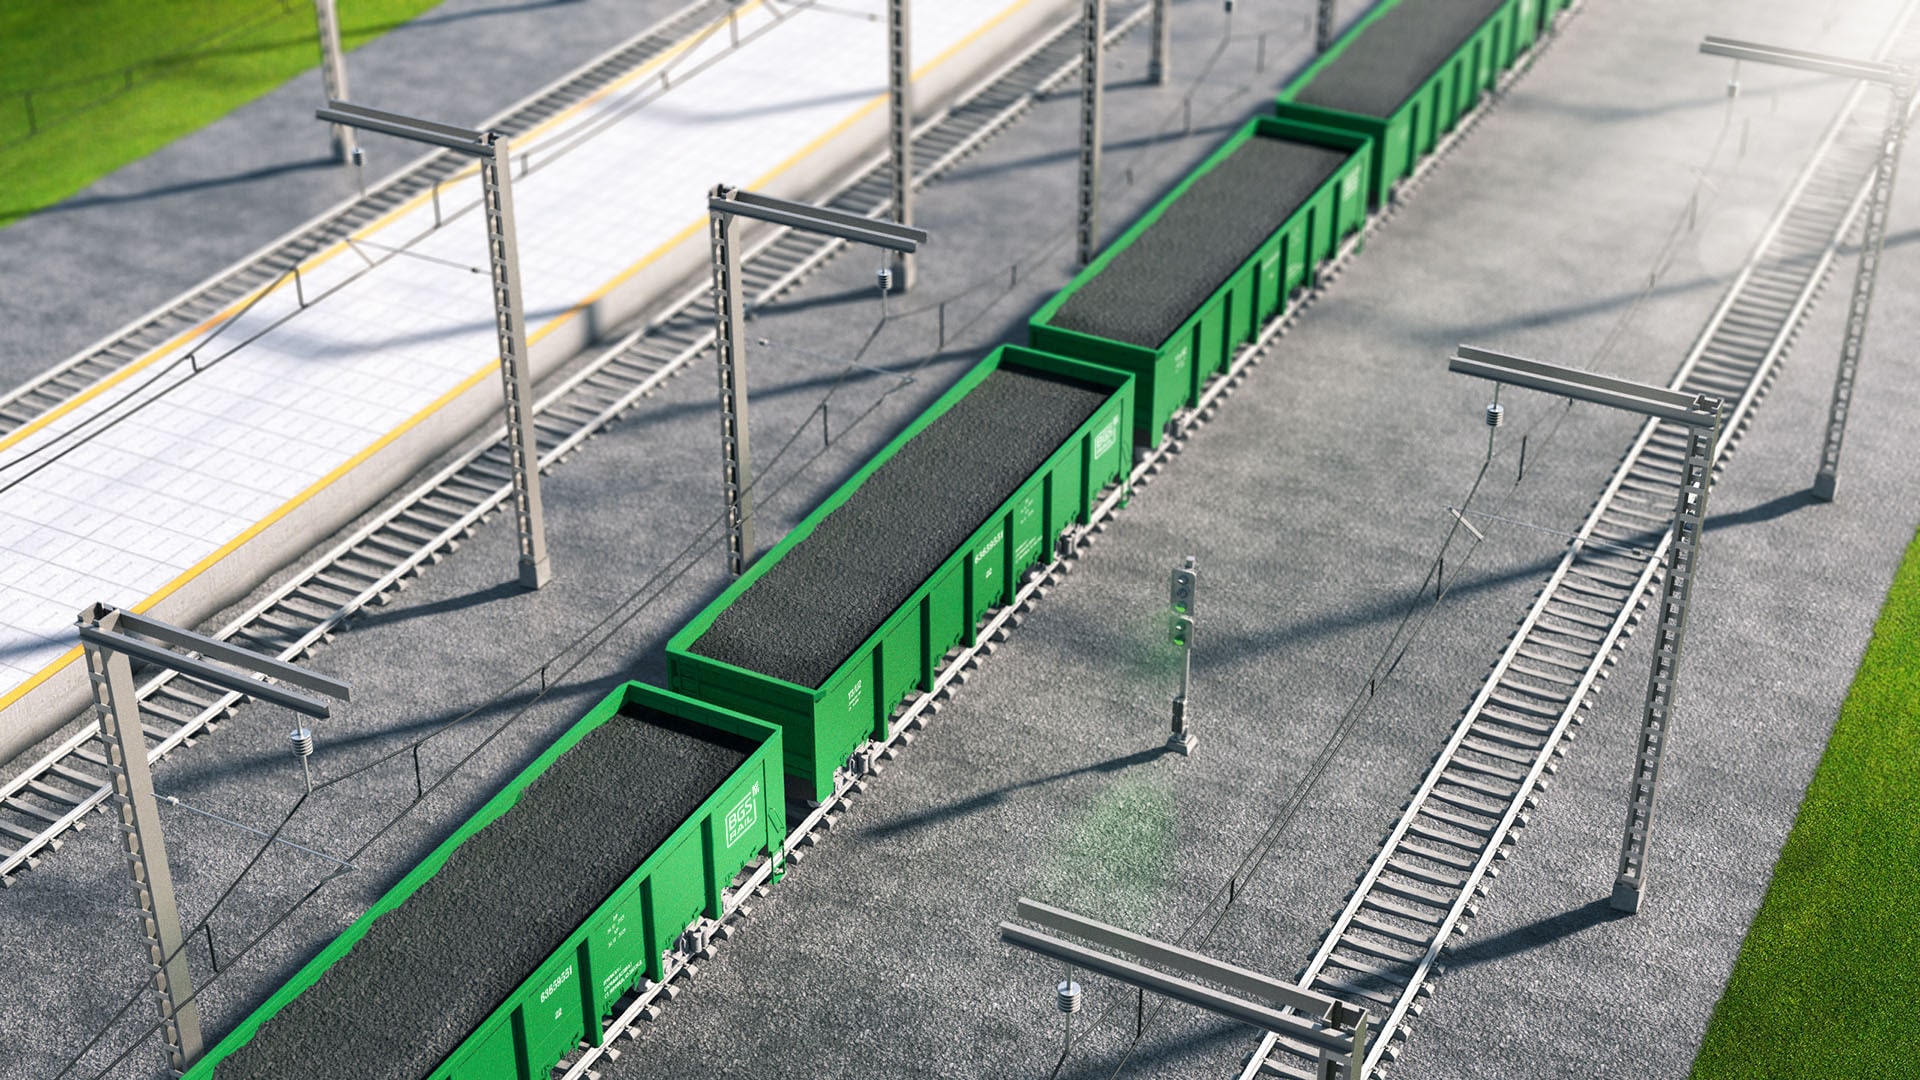 The future of concession terminals and fitting platforms – BGS Rail announced new development plans